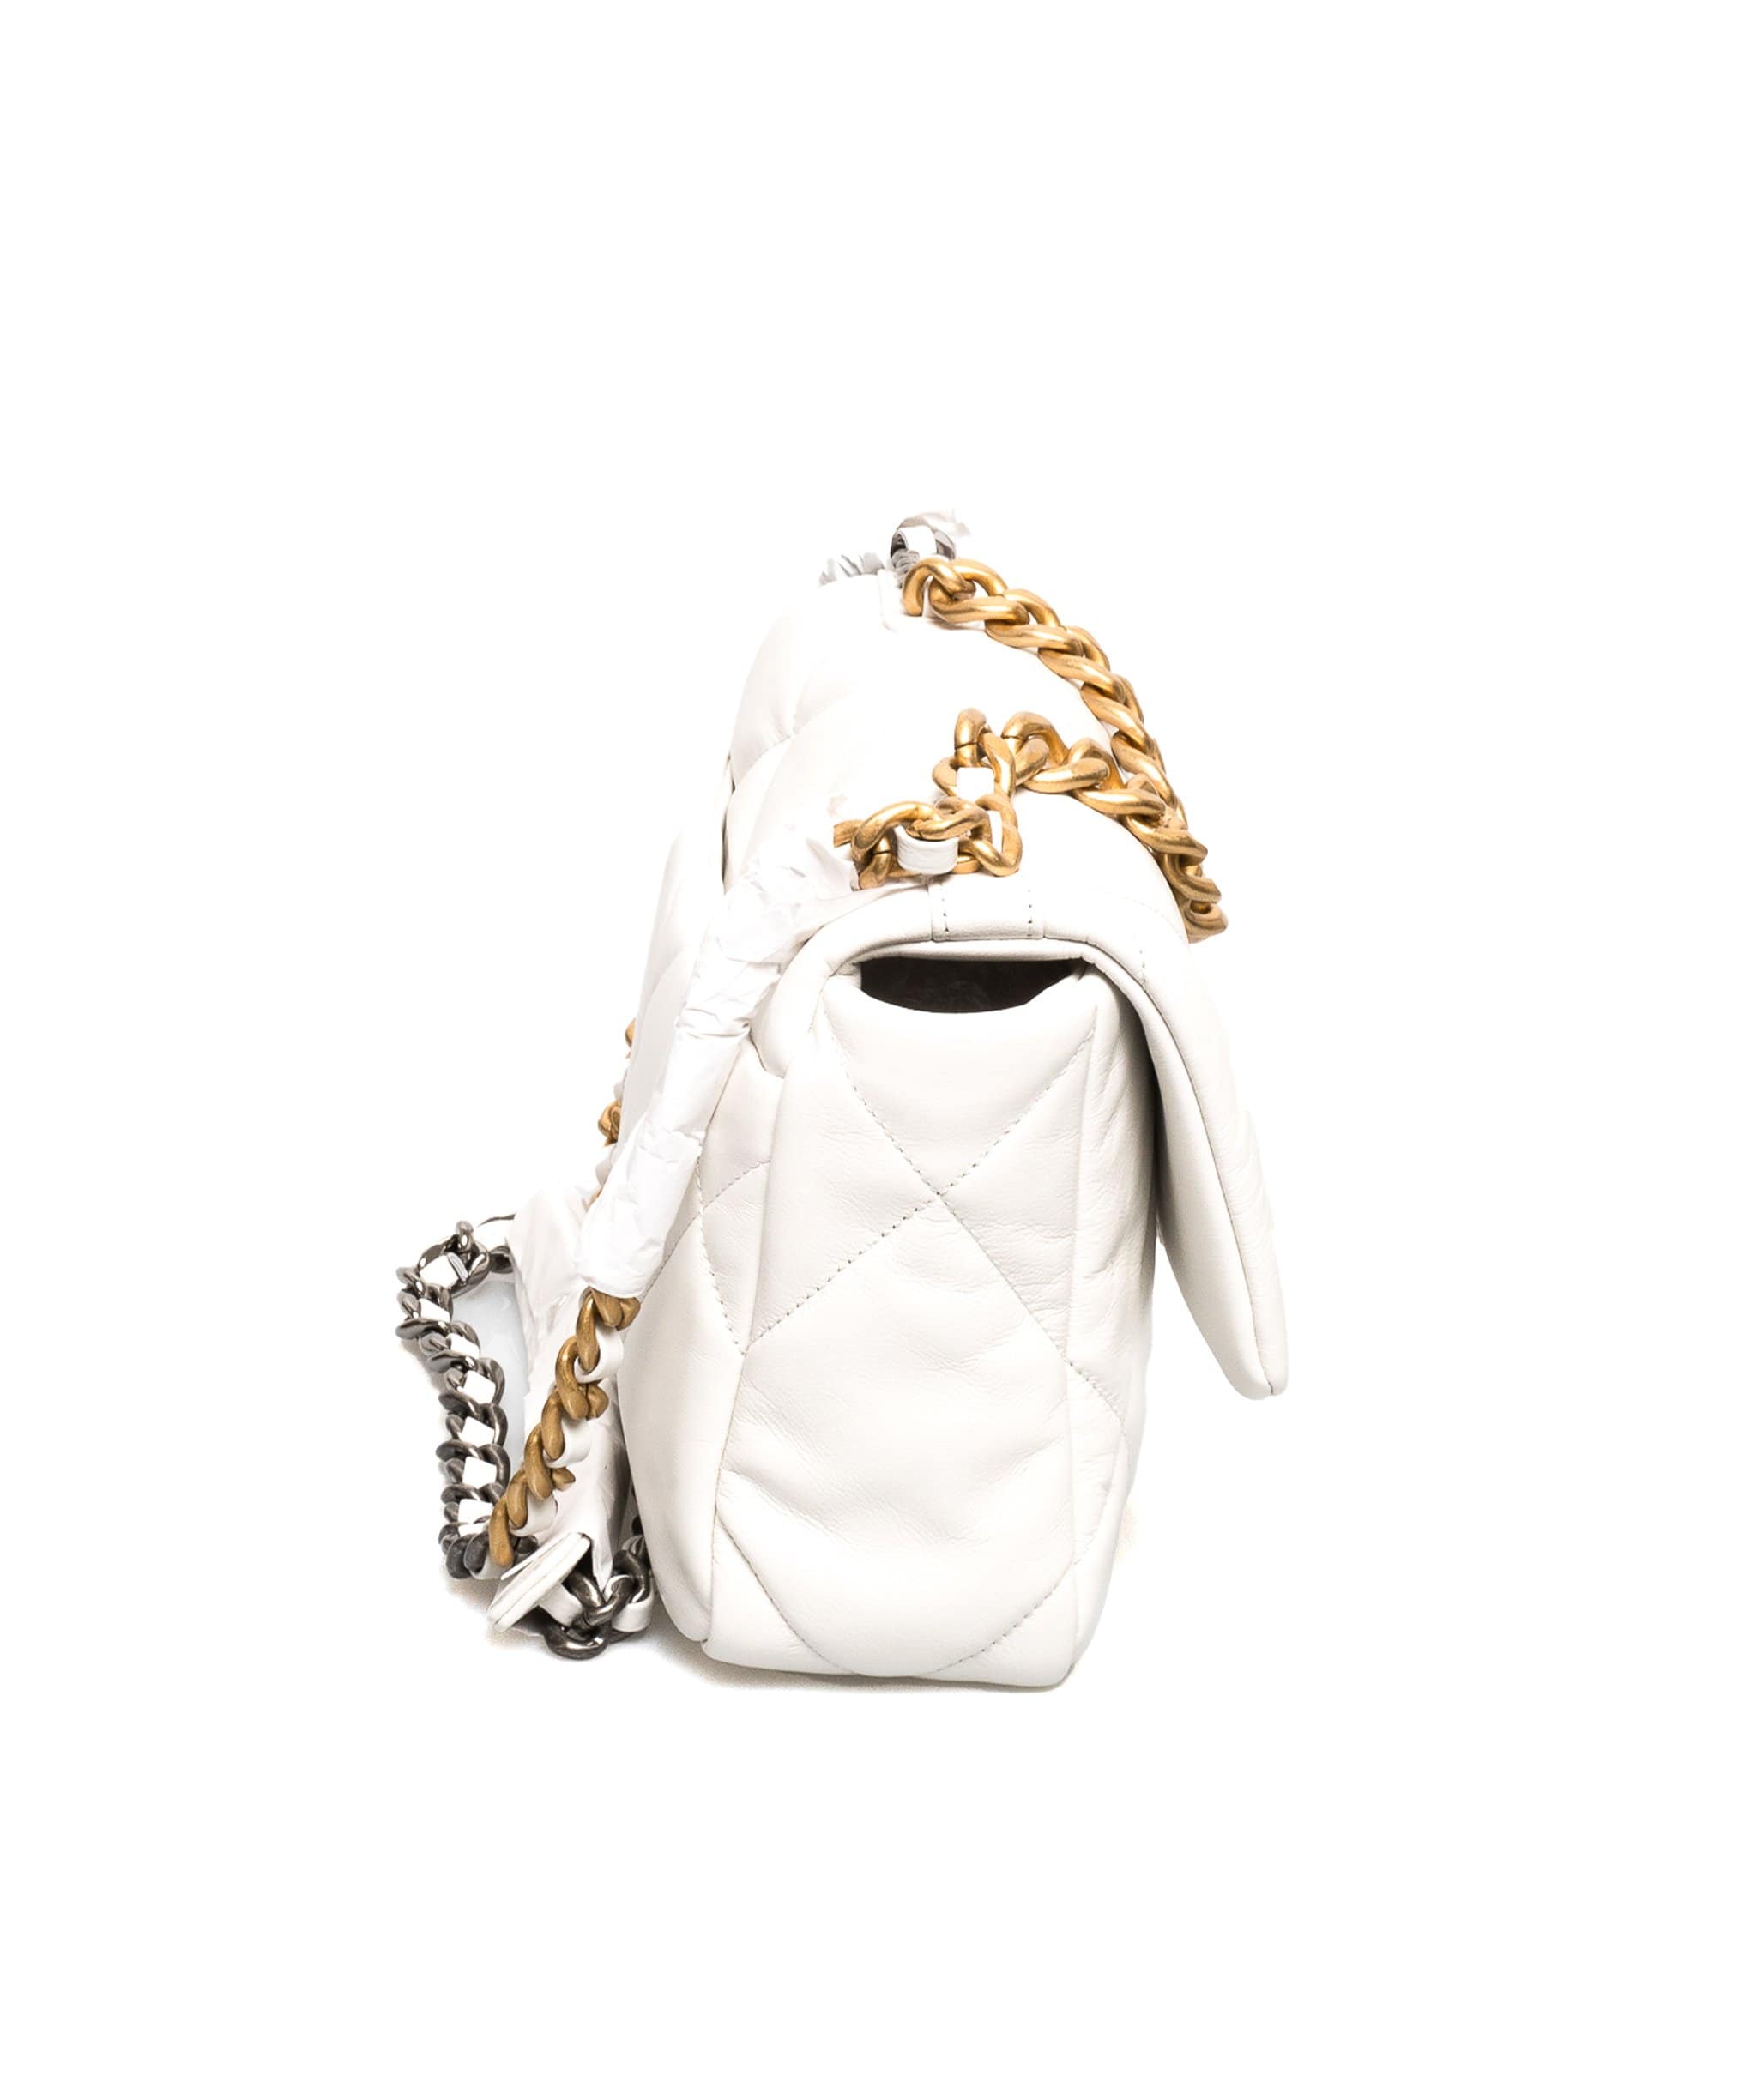 Chanel Chanel Small White Leather 19 Bag - AGL1368o